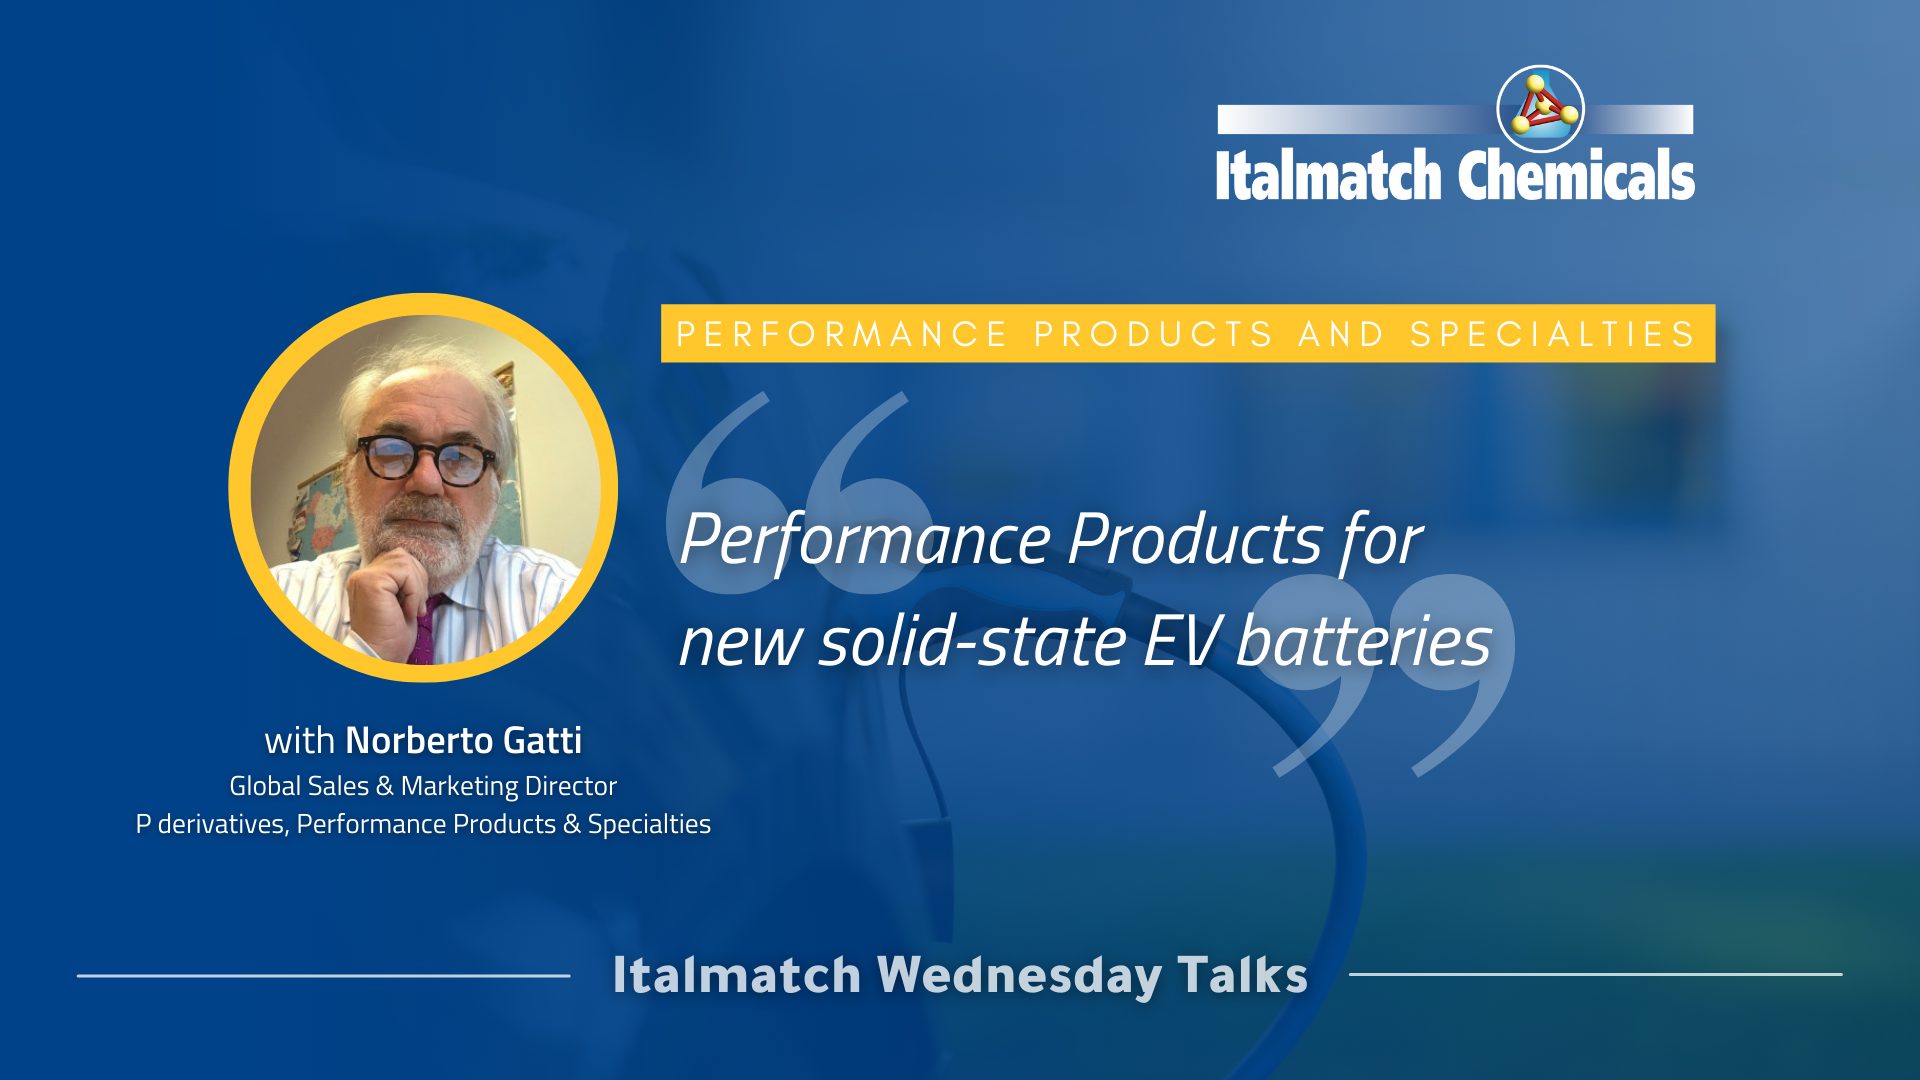 New solid-state ev batteries - Electric Vehicles specialty chemicals Norberto Gatti interview